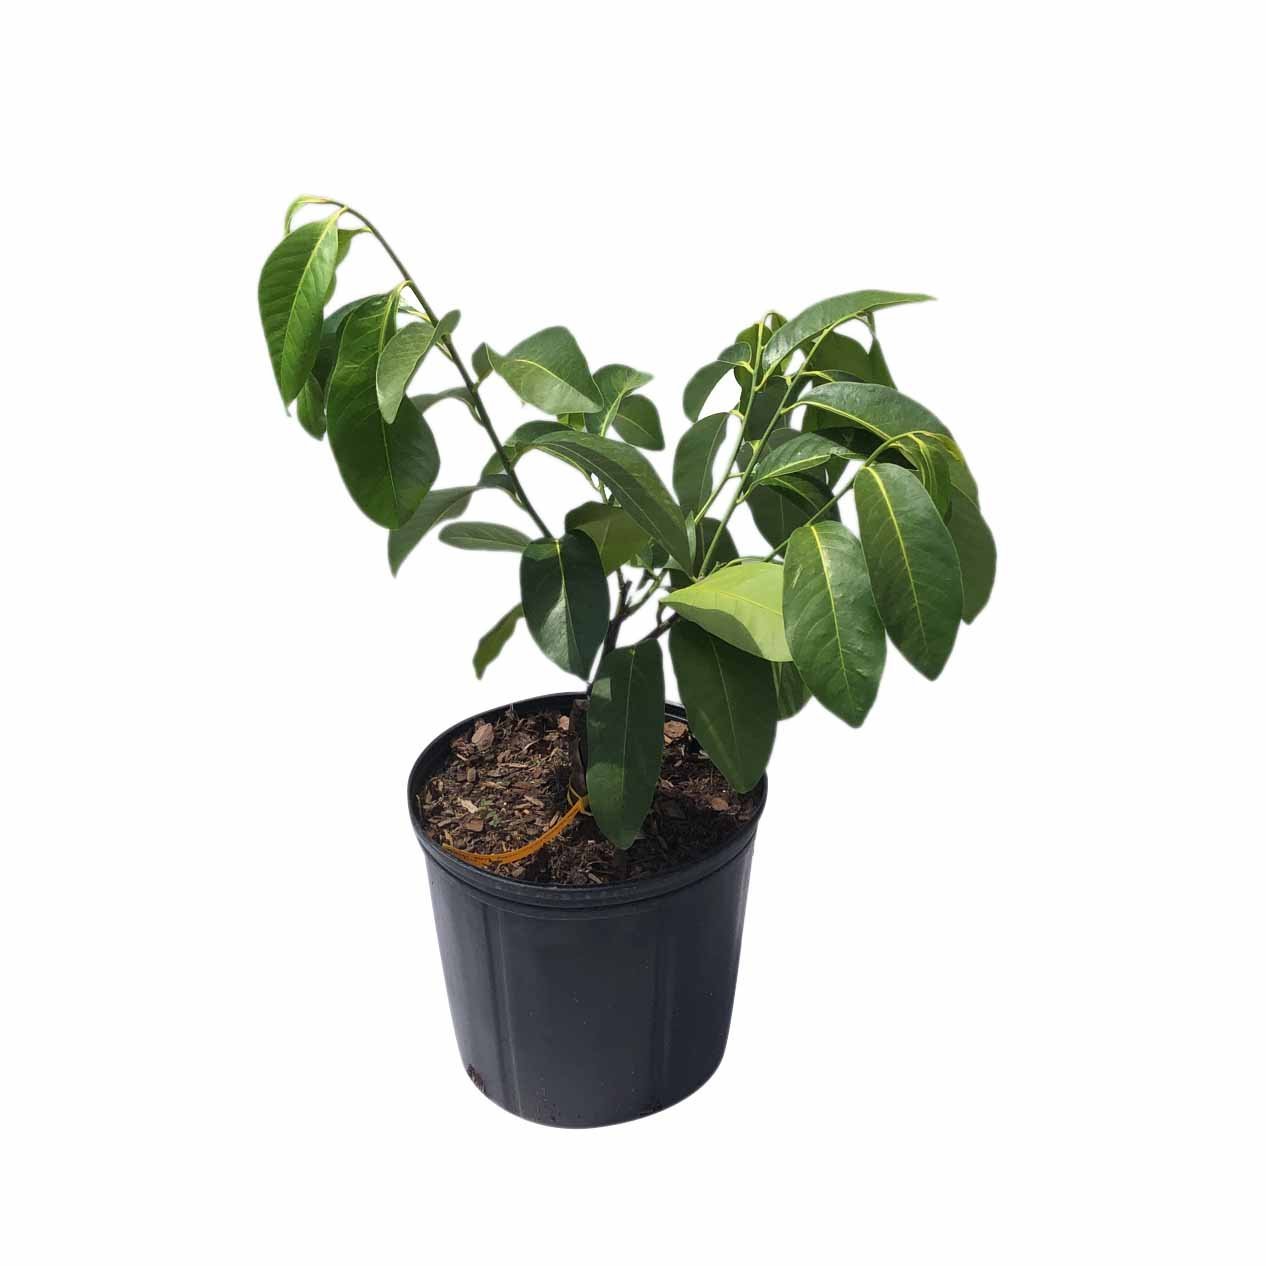 Black Sapote Reineke [Merida] Tree for Sale, 3-Gal Container from Florida